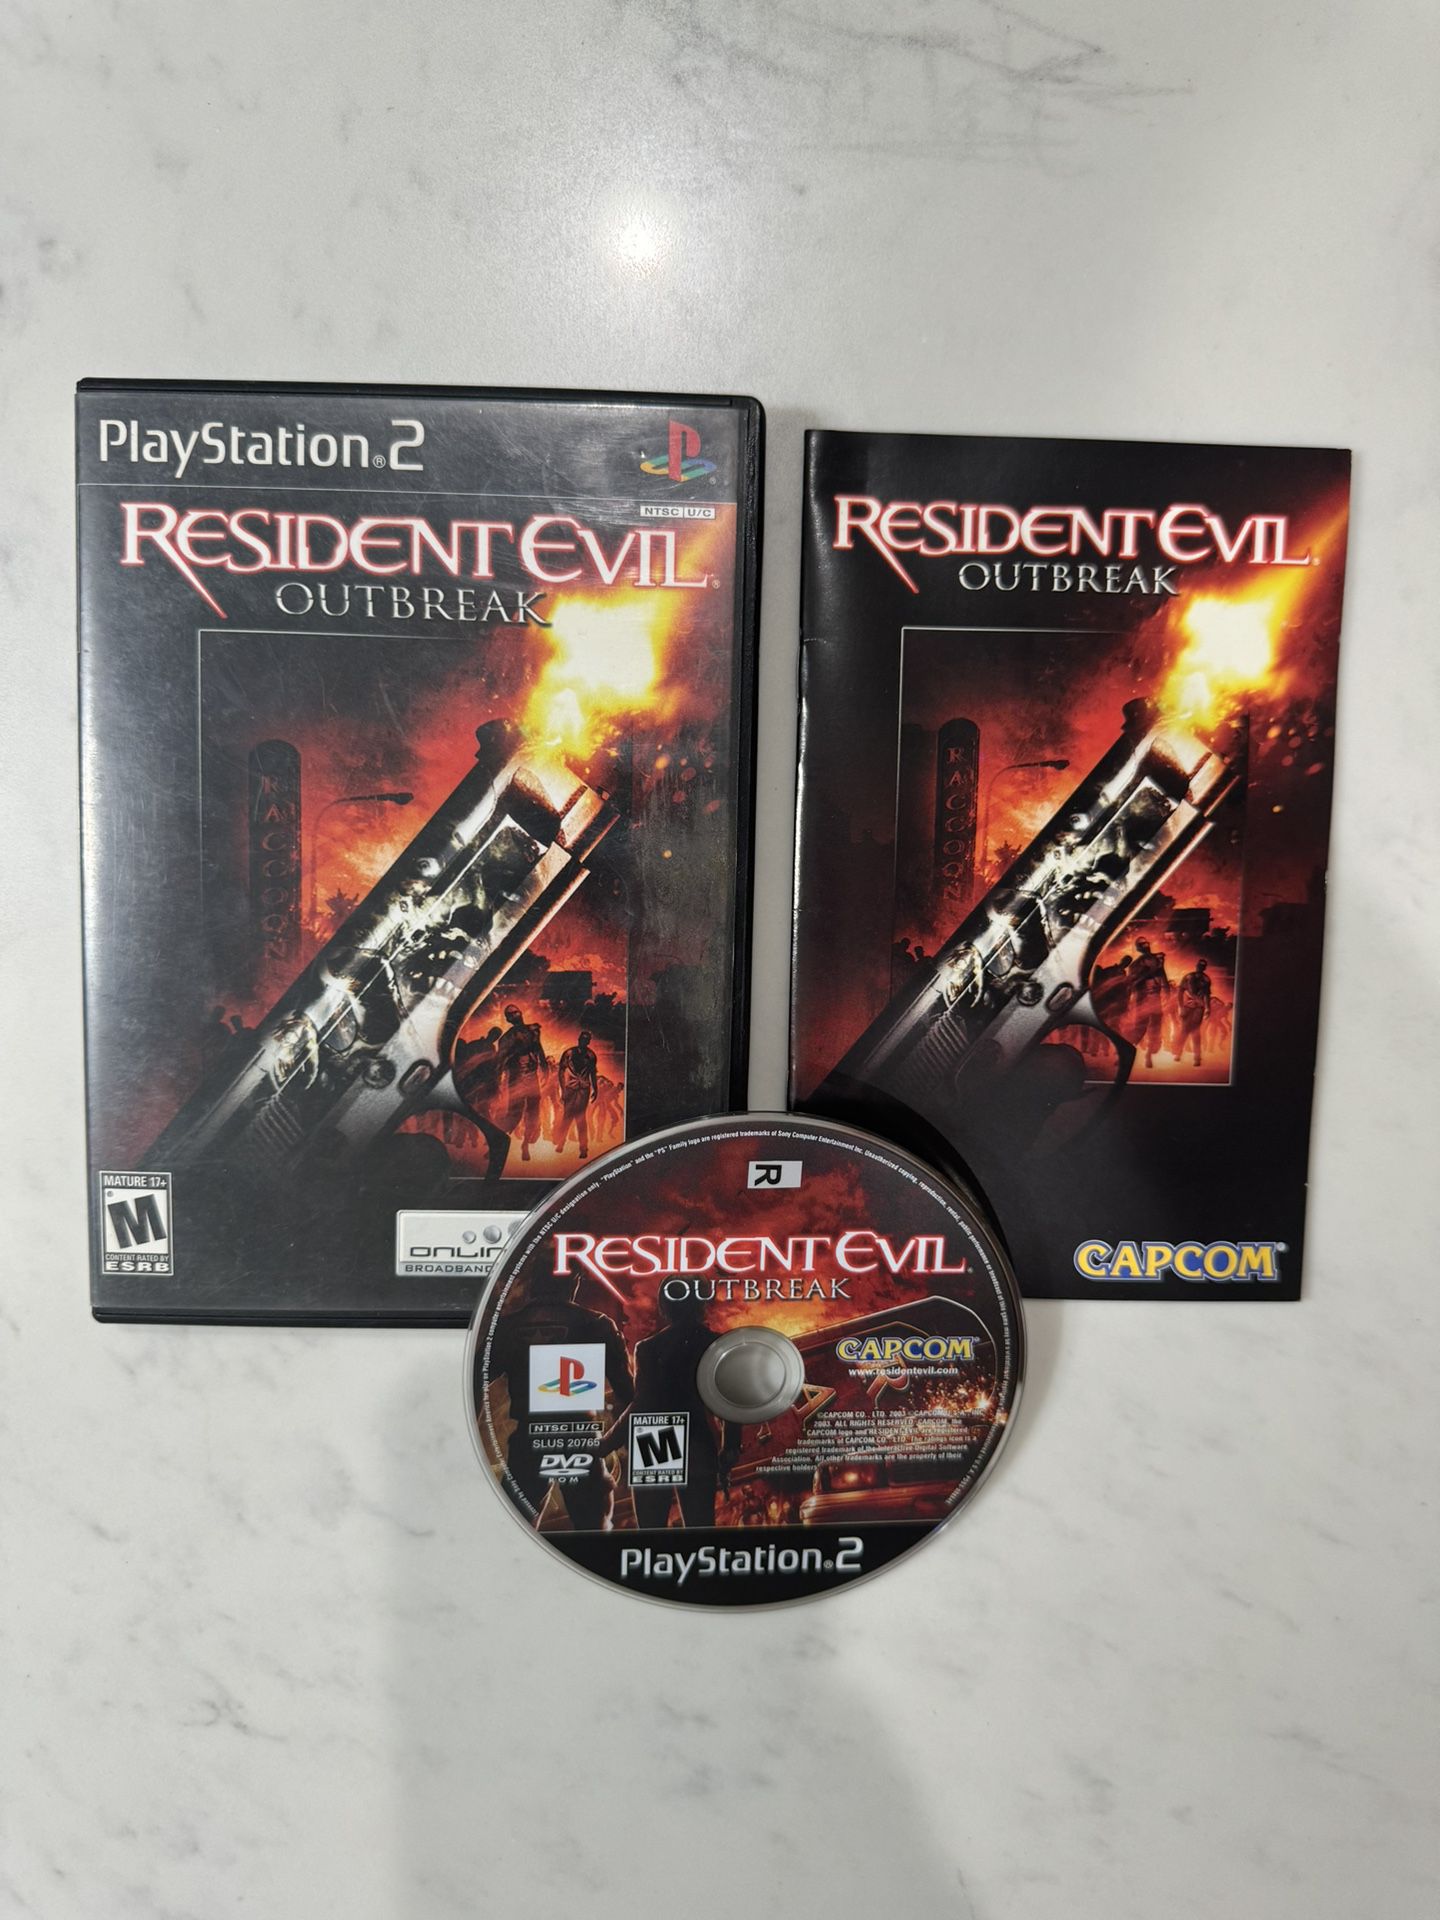 Resident Evil Outbreak Sony PlayStation 2 PS2 GAME